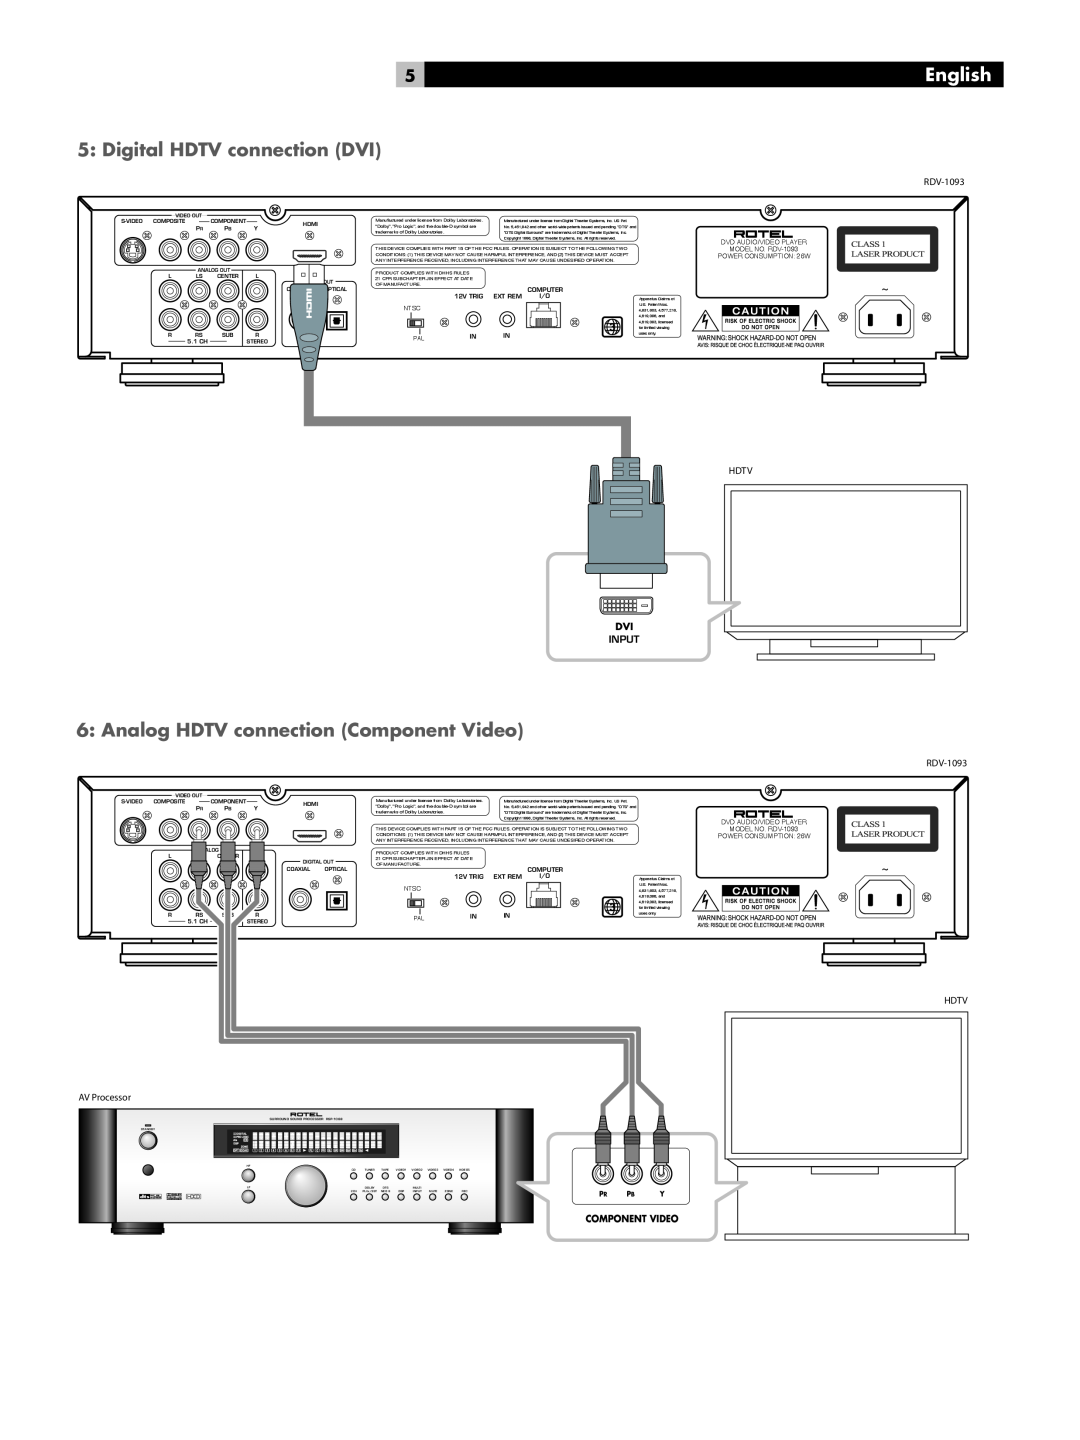 Rotel RDV-1093 owner manual Digital HDTV connection DVI, Analog HDTV connection Component Video, English, Ntsc 